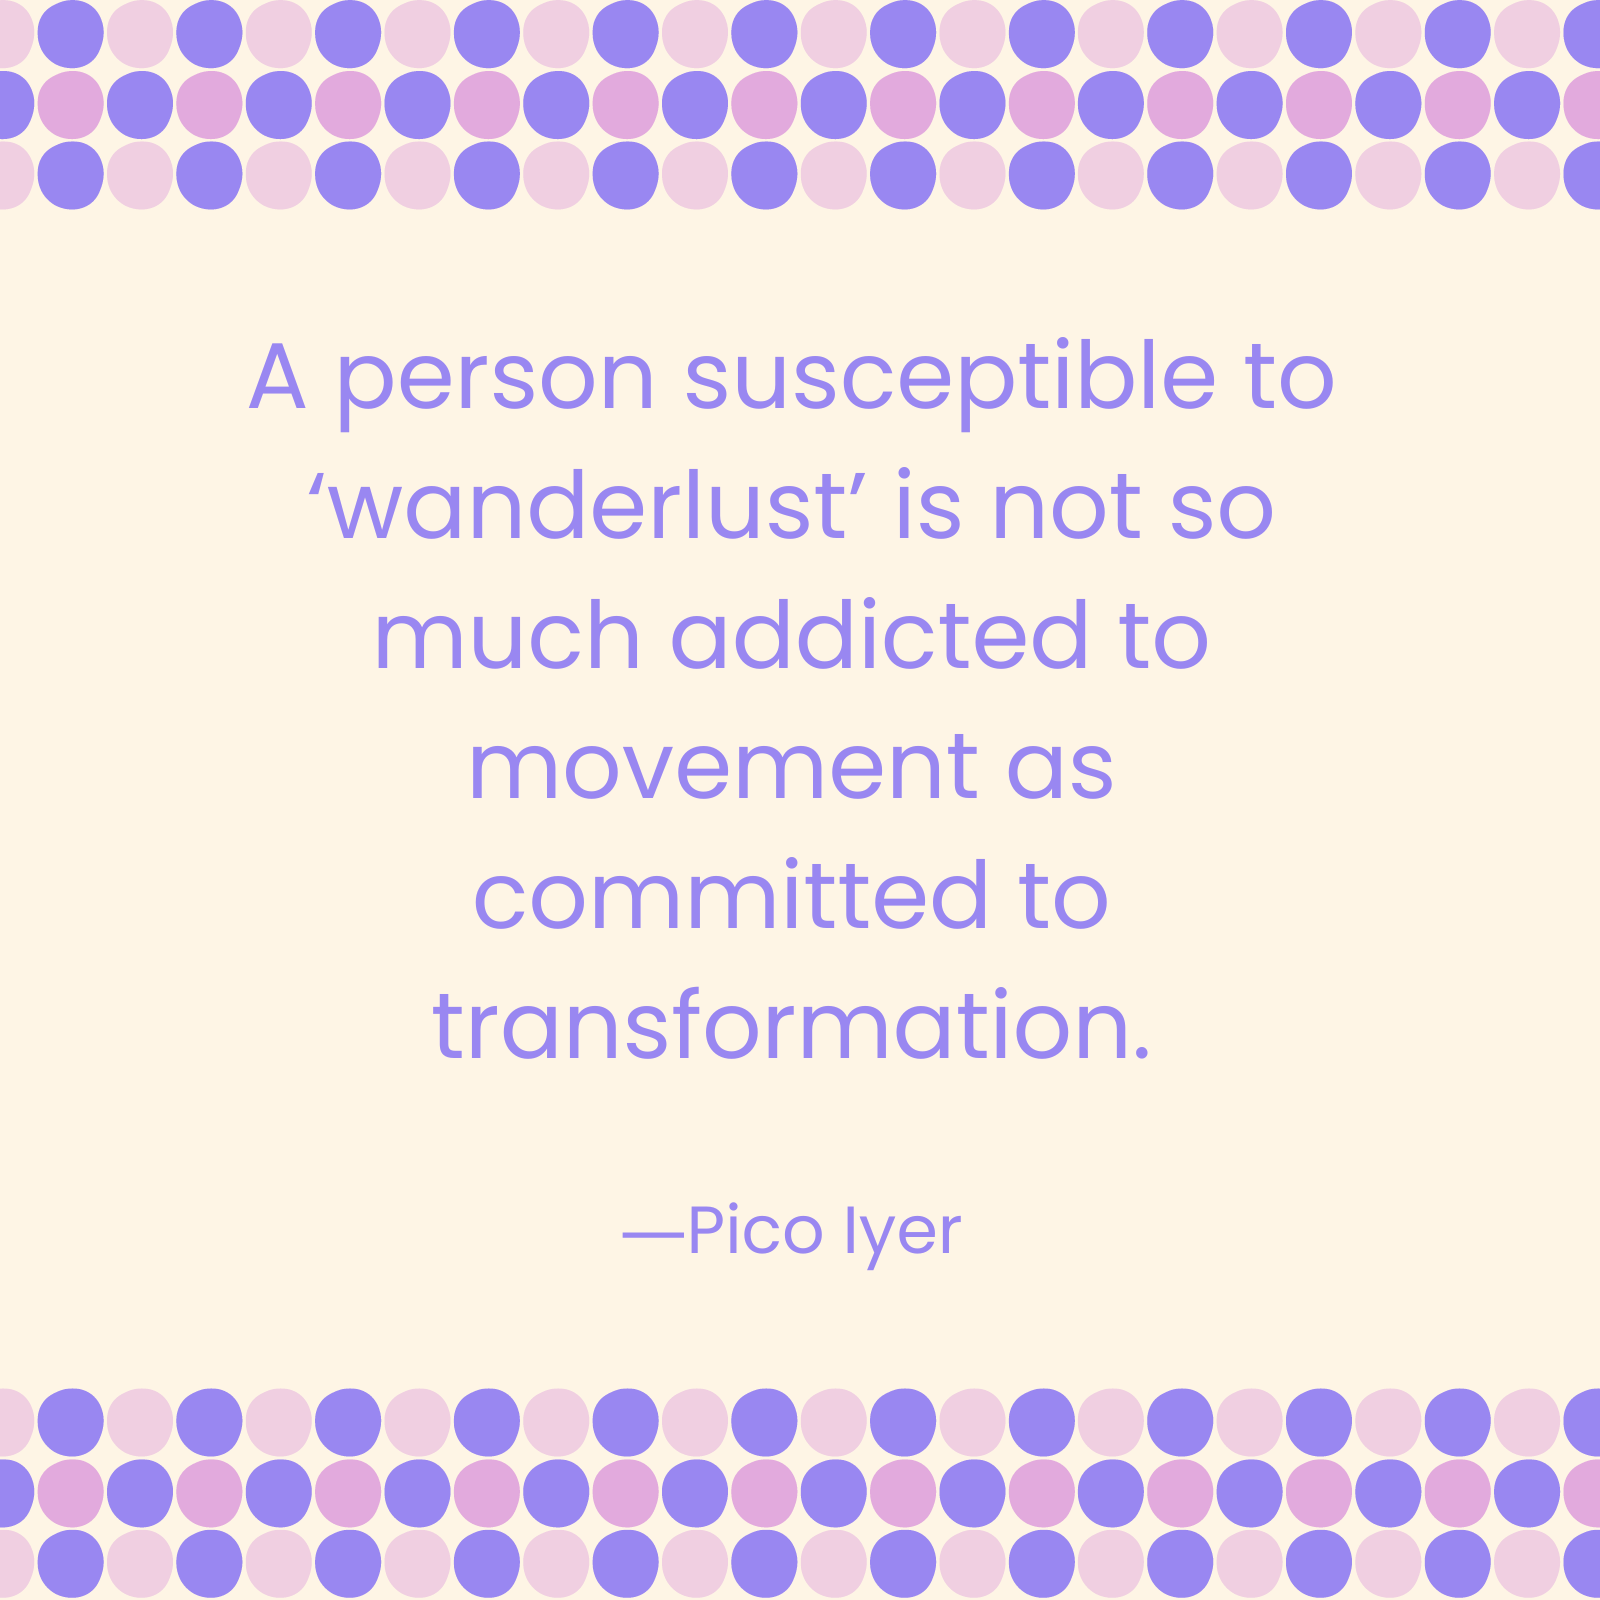 <p>"A person susceptible to 'wanderlust' is not so much addicted to movement as committed to transformation." —Pico Iyer</p><p>Like Brit + Co's content? <a href="https://www.msn.com/en-us/channel/source/BRITCO/sr-vid-mwh45mxjpbgutp55qr3ca3bnmhxae80xpqj0vw80yesb5g0h5q2a?cvid=6efac0aec71d460989f862c7f33ea985&ei=106">Be sure to follow us for more! </a> </p>